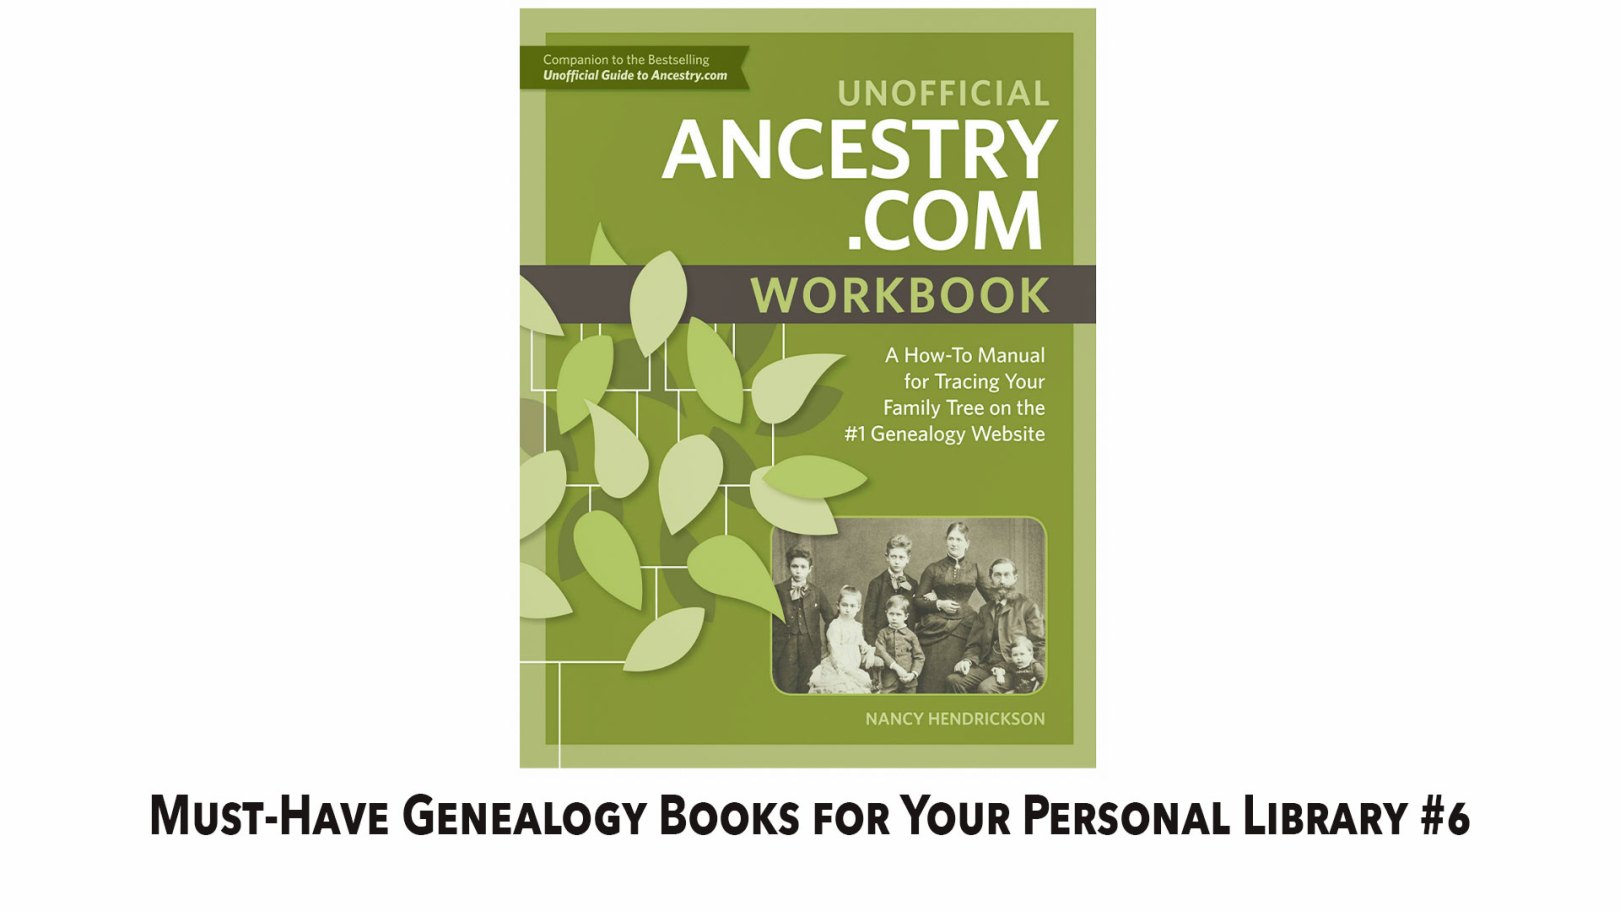 Must-Have Genealogy Books for Your Personal Library #6